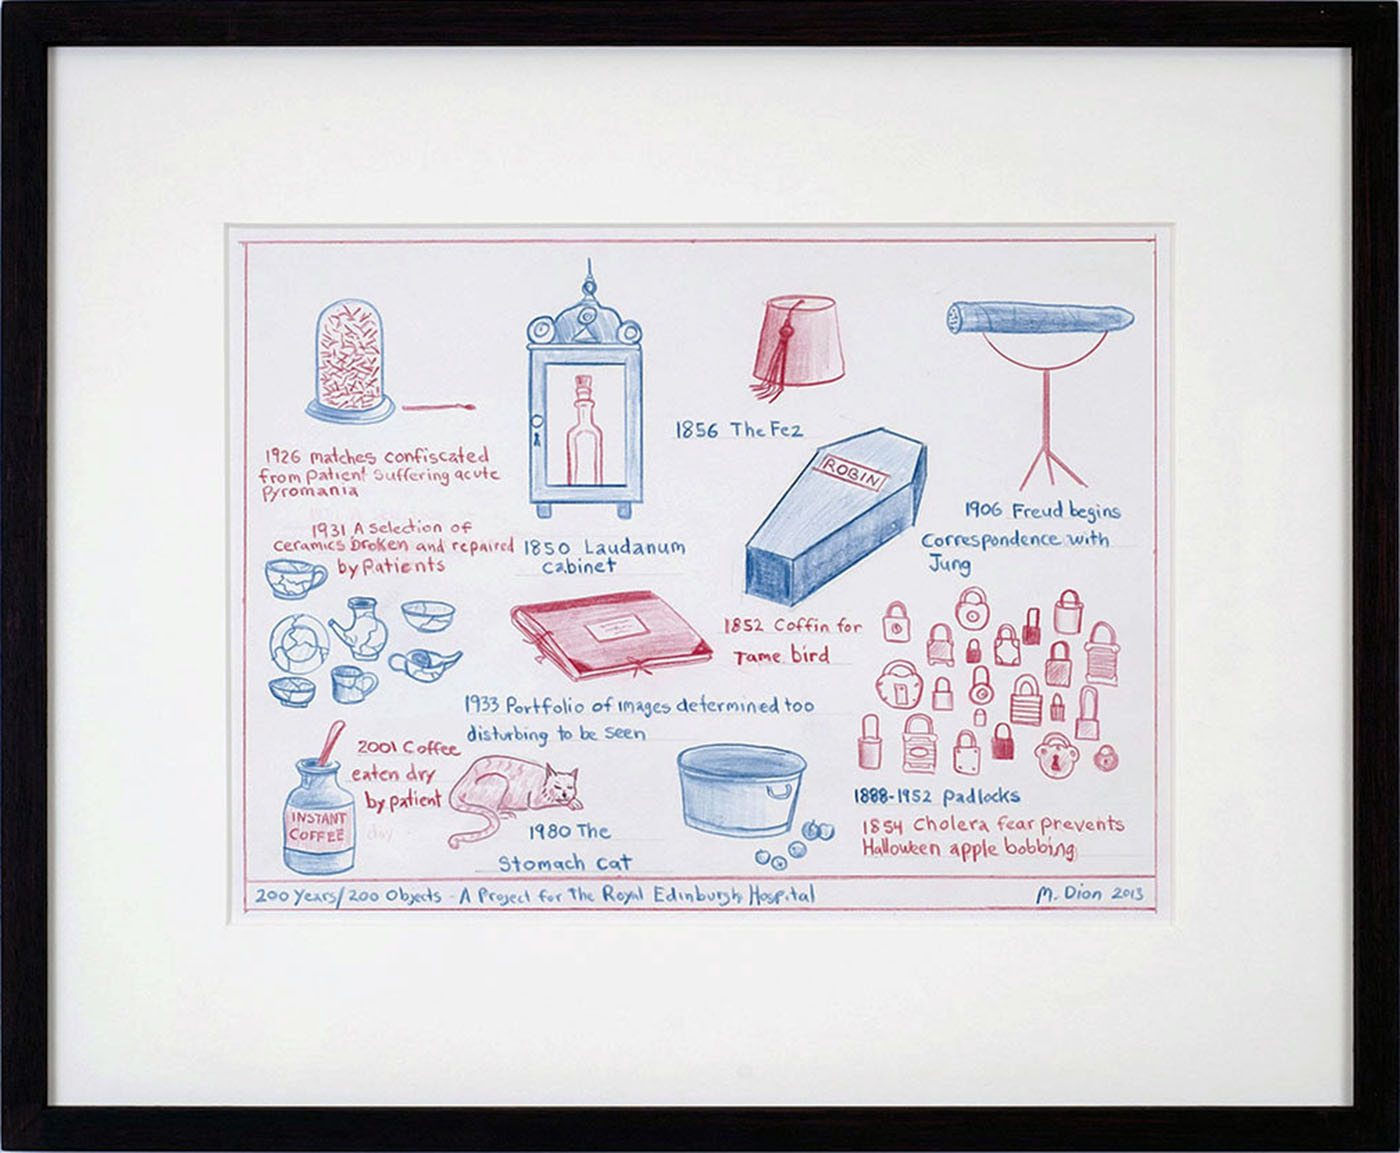 200 Years / 200 Objects : A project for the Royal Edinburgh Hospital, 2013